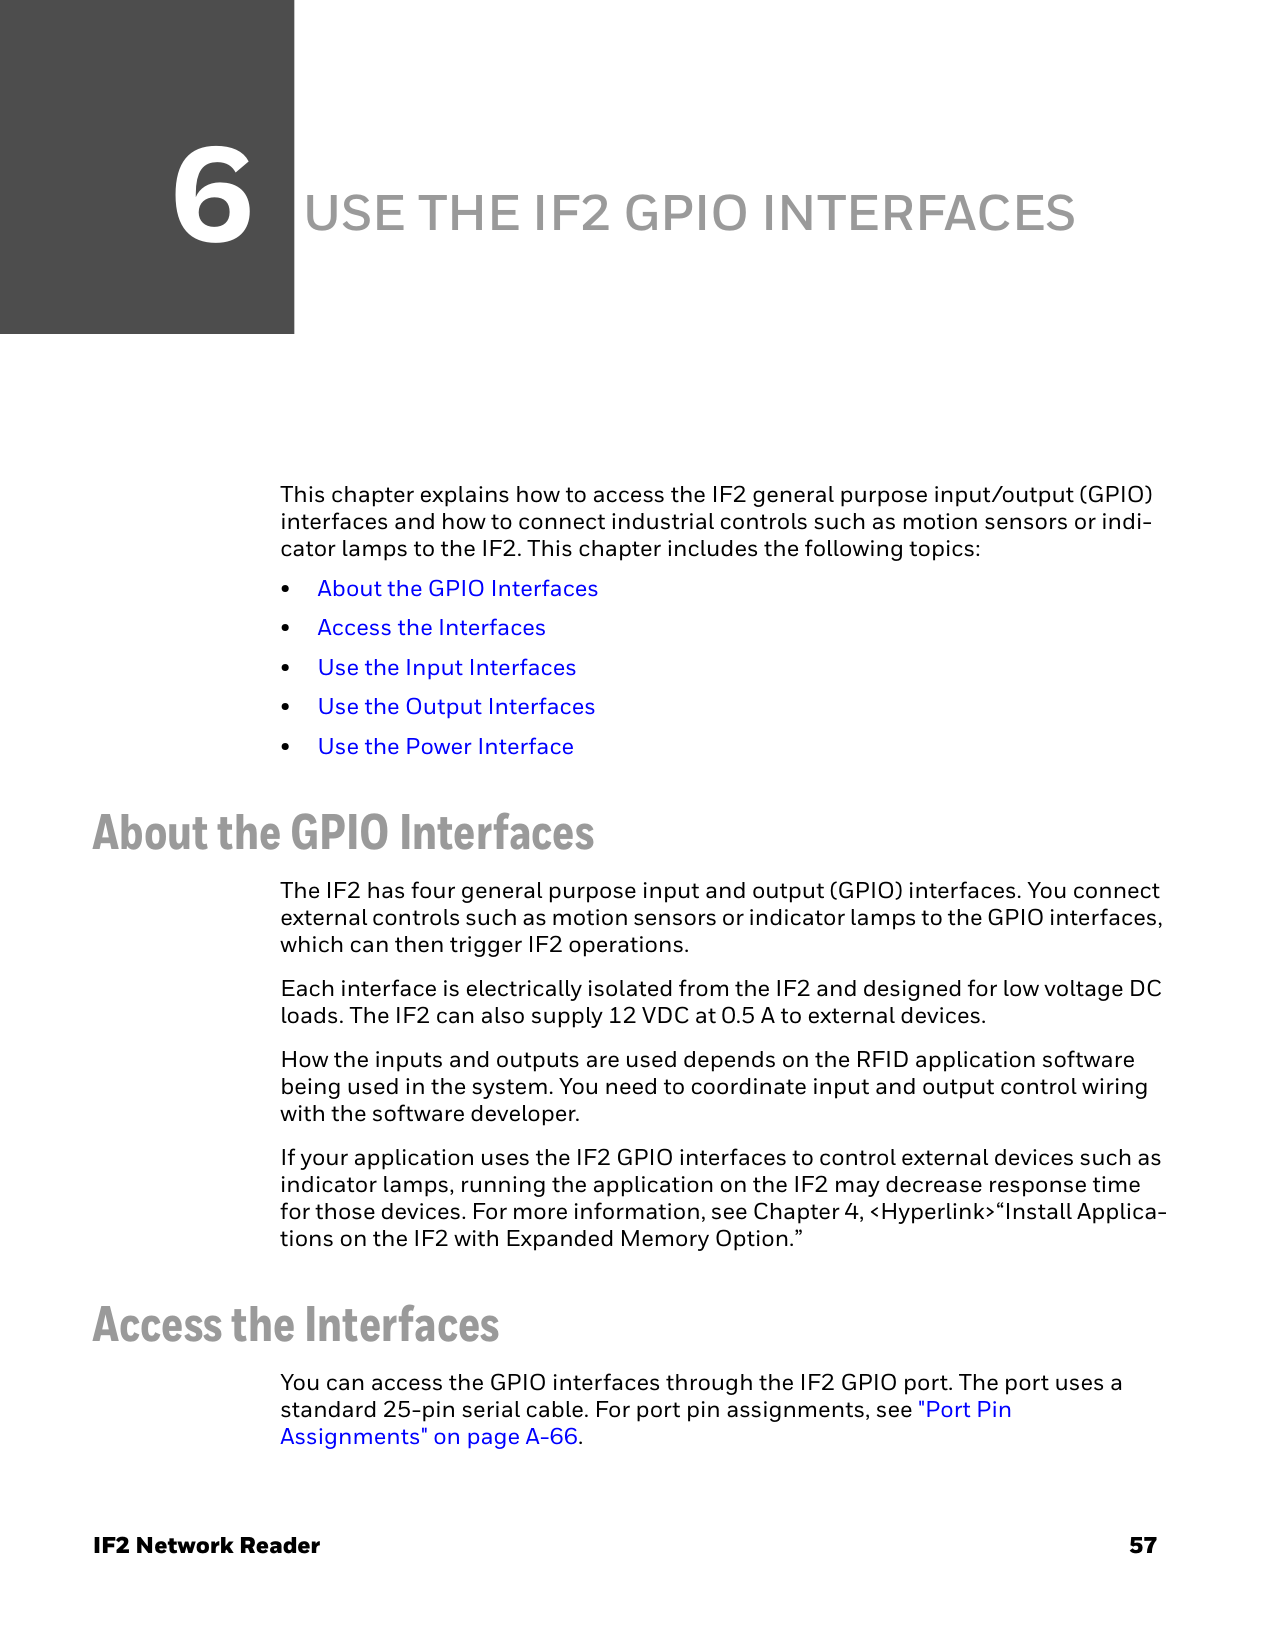 6IF2 Network Reader 57USE THE IF2 GPIO INTERFACESThis chapter explains how to access the IF2 general purpose input/output (GPIO) interfaces and how to connect industrial controls such as motion sensors or indi-cator lamps to the IF2. This chapter includes the following topics:•About the GPIO Interfaces•Access the Interfaces•Use the Input Interfaces•Use the Output Interfaces•Use the Power InterfaceAbout the GPIO InterfacesThe IF2 has four general purpose input and output (GPIO) interfaces. You connect external controls such as motion sensors or indicator lamps to the GPIO interfaces, which can then trigger IF2 operations.Each interface is electrically isolated from the IF2 and designed for low voltage DC loads. The IF2 can also supply 12 VDC at 0.5 A to external devices.How the inputs and outputs are used depends on the RFID application software being used in the system. You need to coordinate input and output control wiring with the software developer.If your application uses the IF2 GPIO interfaces to control external devices such as indicator lamps, running the application on the IF2 may decrease response time for those devices. For more information, see Chapter 4, &lt;Hyperlink&gt;“Install Applica-tions on the IF2 with Expanded Memory Option.”Access the InterfacesYou can access the GPIO interfaces through the IF2 GPIO port. The port uses a standard 25-pin serial cable. For port pin assignments, see &quot;Port Pin Assignments&quot; on page A-66.